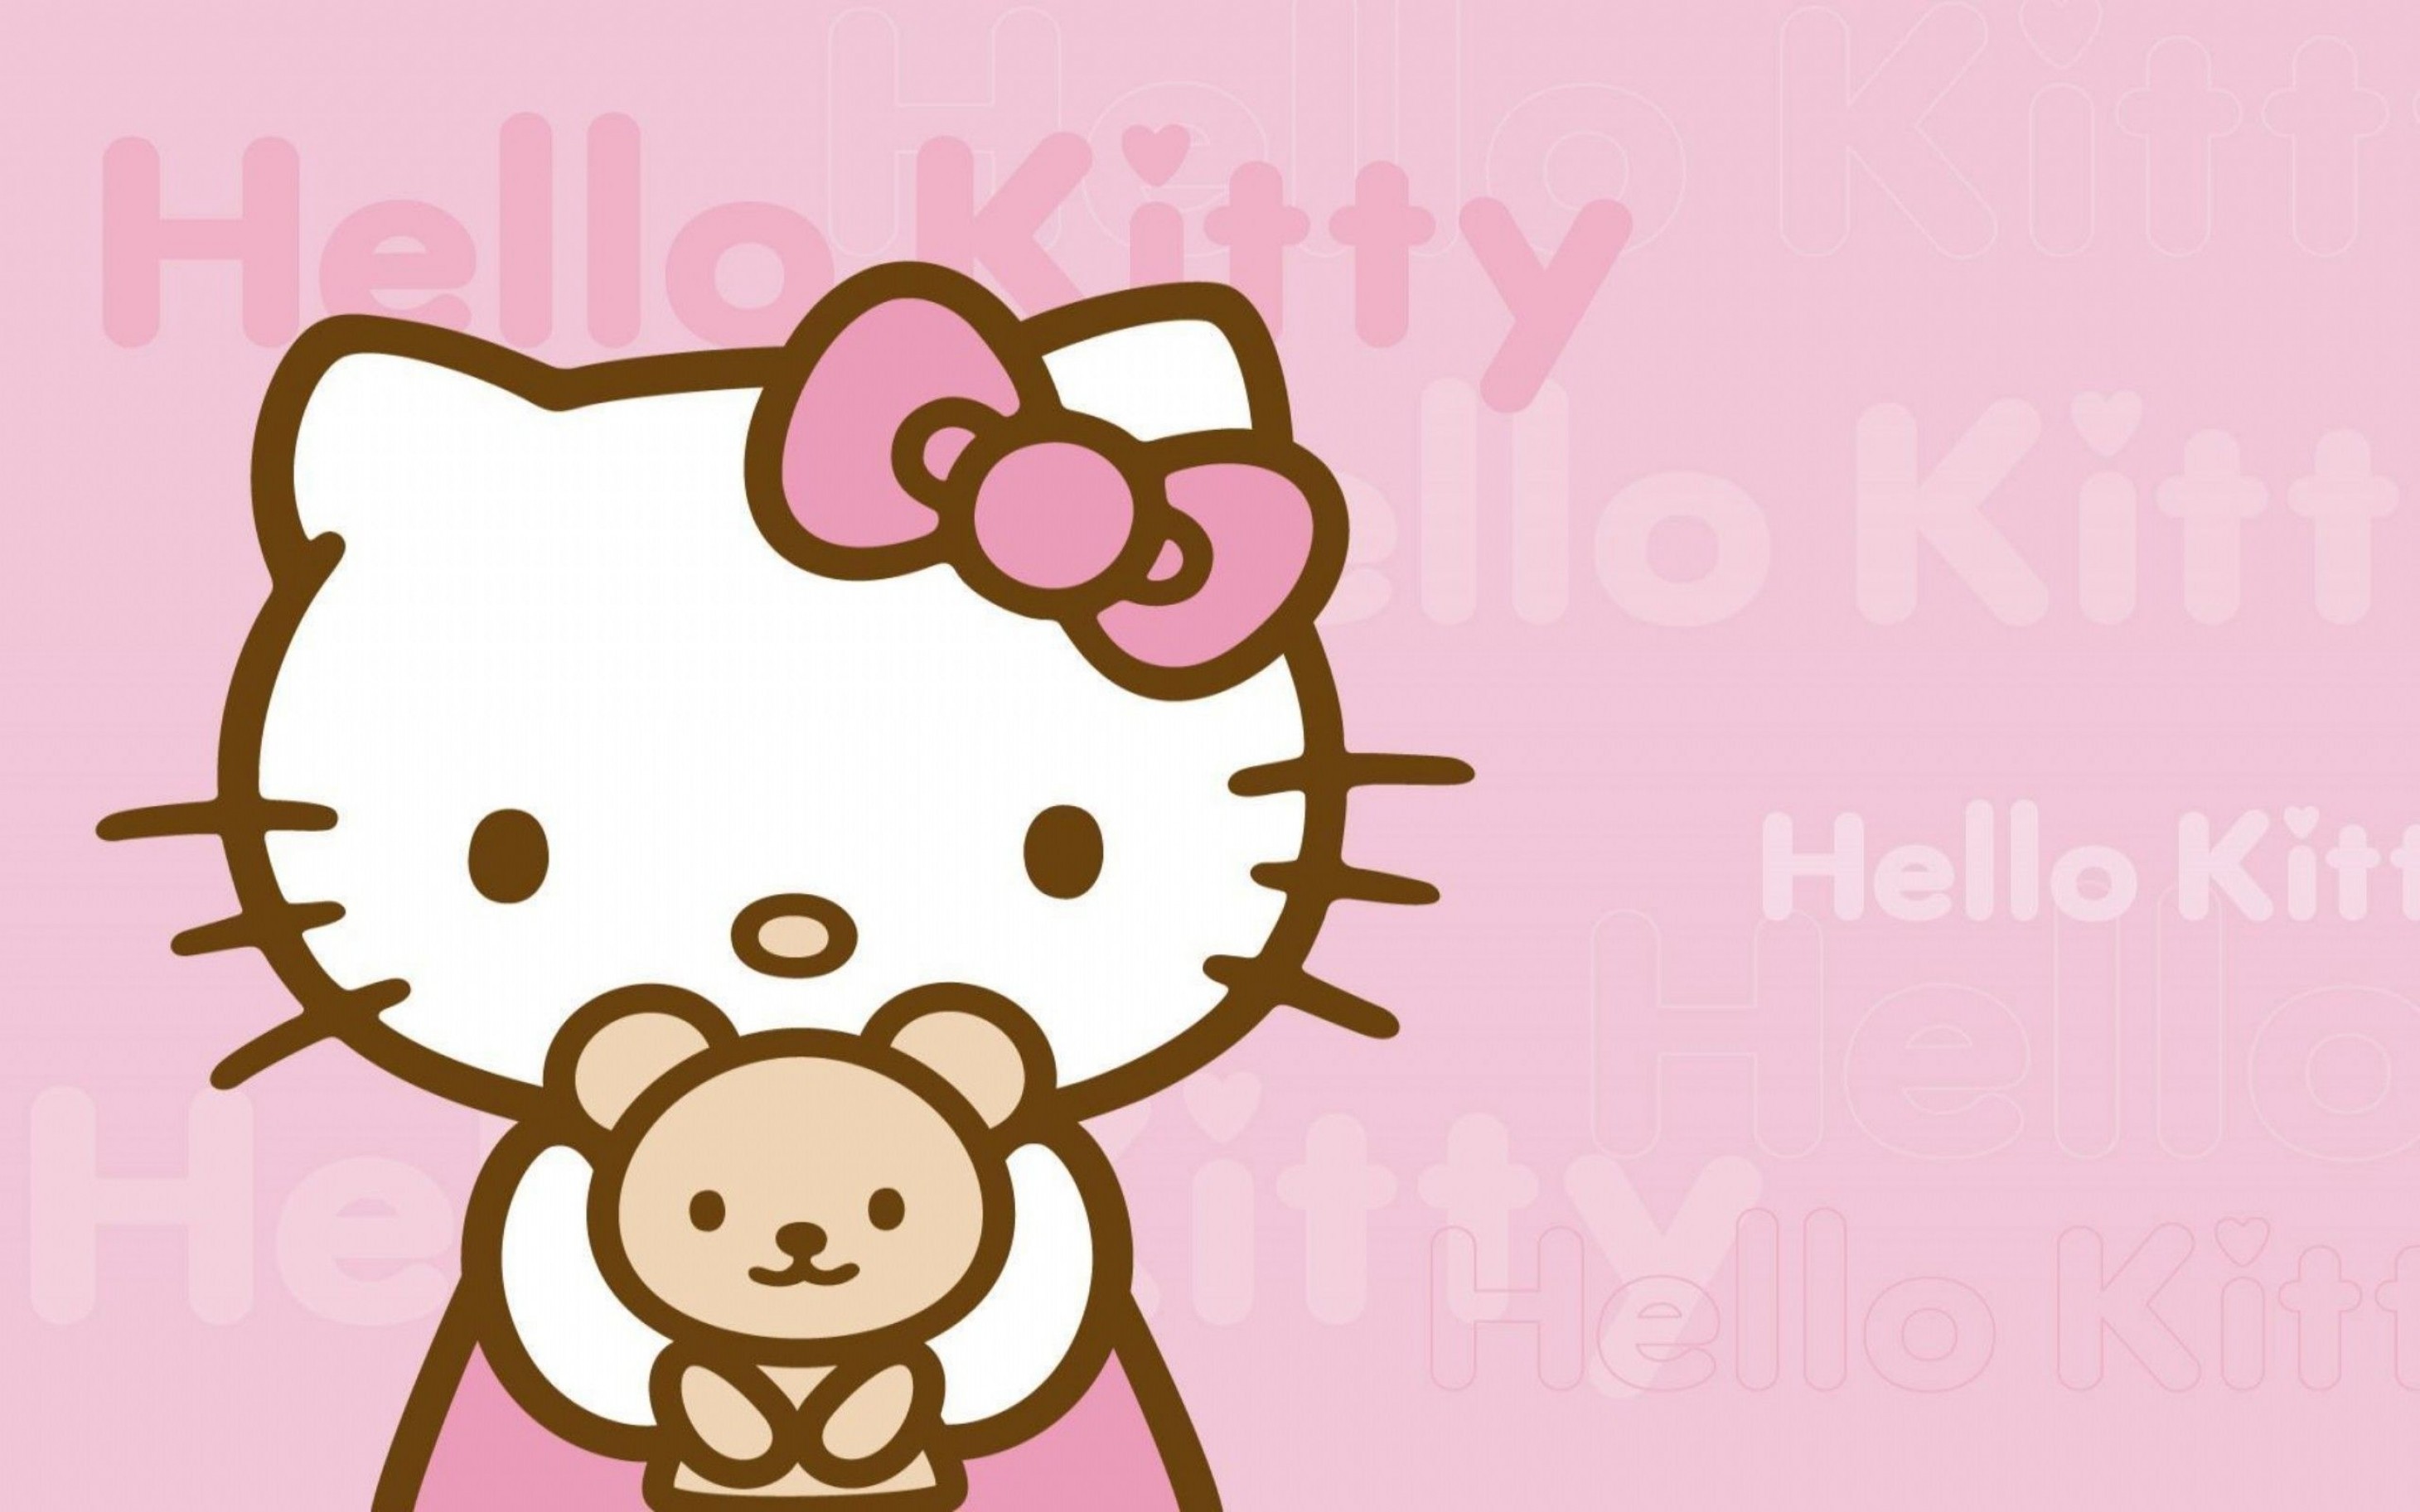 2920x1825 We renew hello kitty wallpaper for android tablet slides to make you always  find the best here , these images were posted 09-03-2014, 11:10 AM and may  be ...